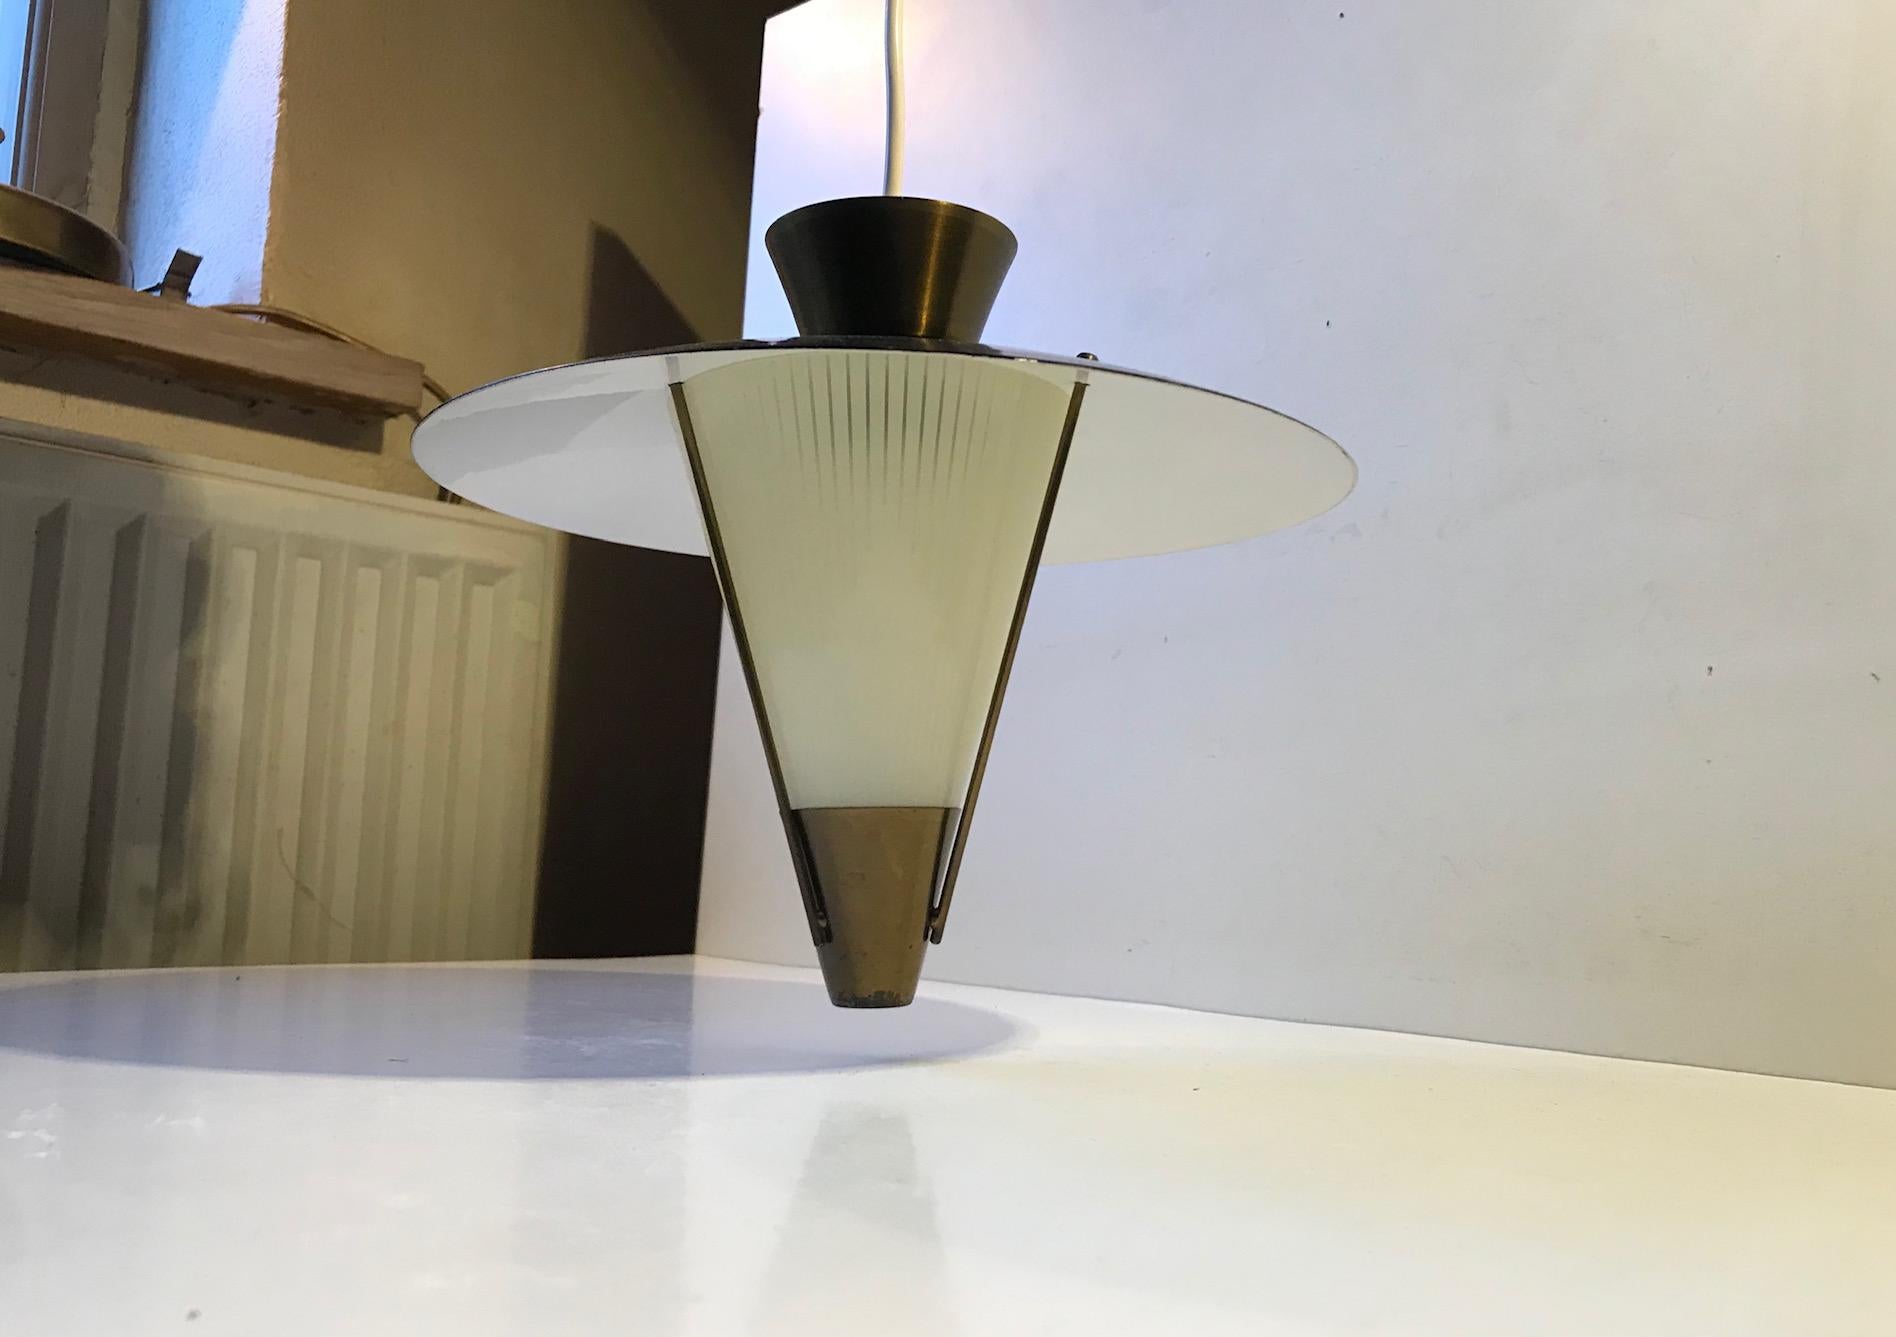 A Ballerina or spinning top shaped pendant lamp composed of a brass top, black lacquered aluminium shade and a brass supported conical shade in pinstriped glass. It was made in Scandinavia during the 1940s probably by either Voss Belysning in